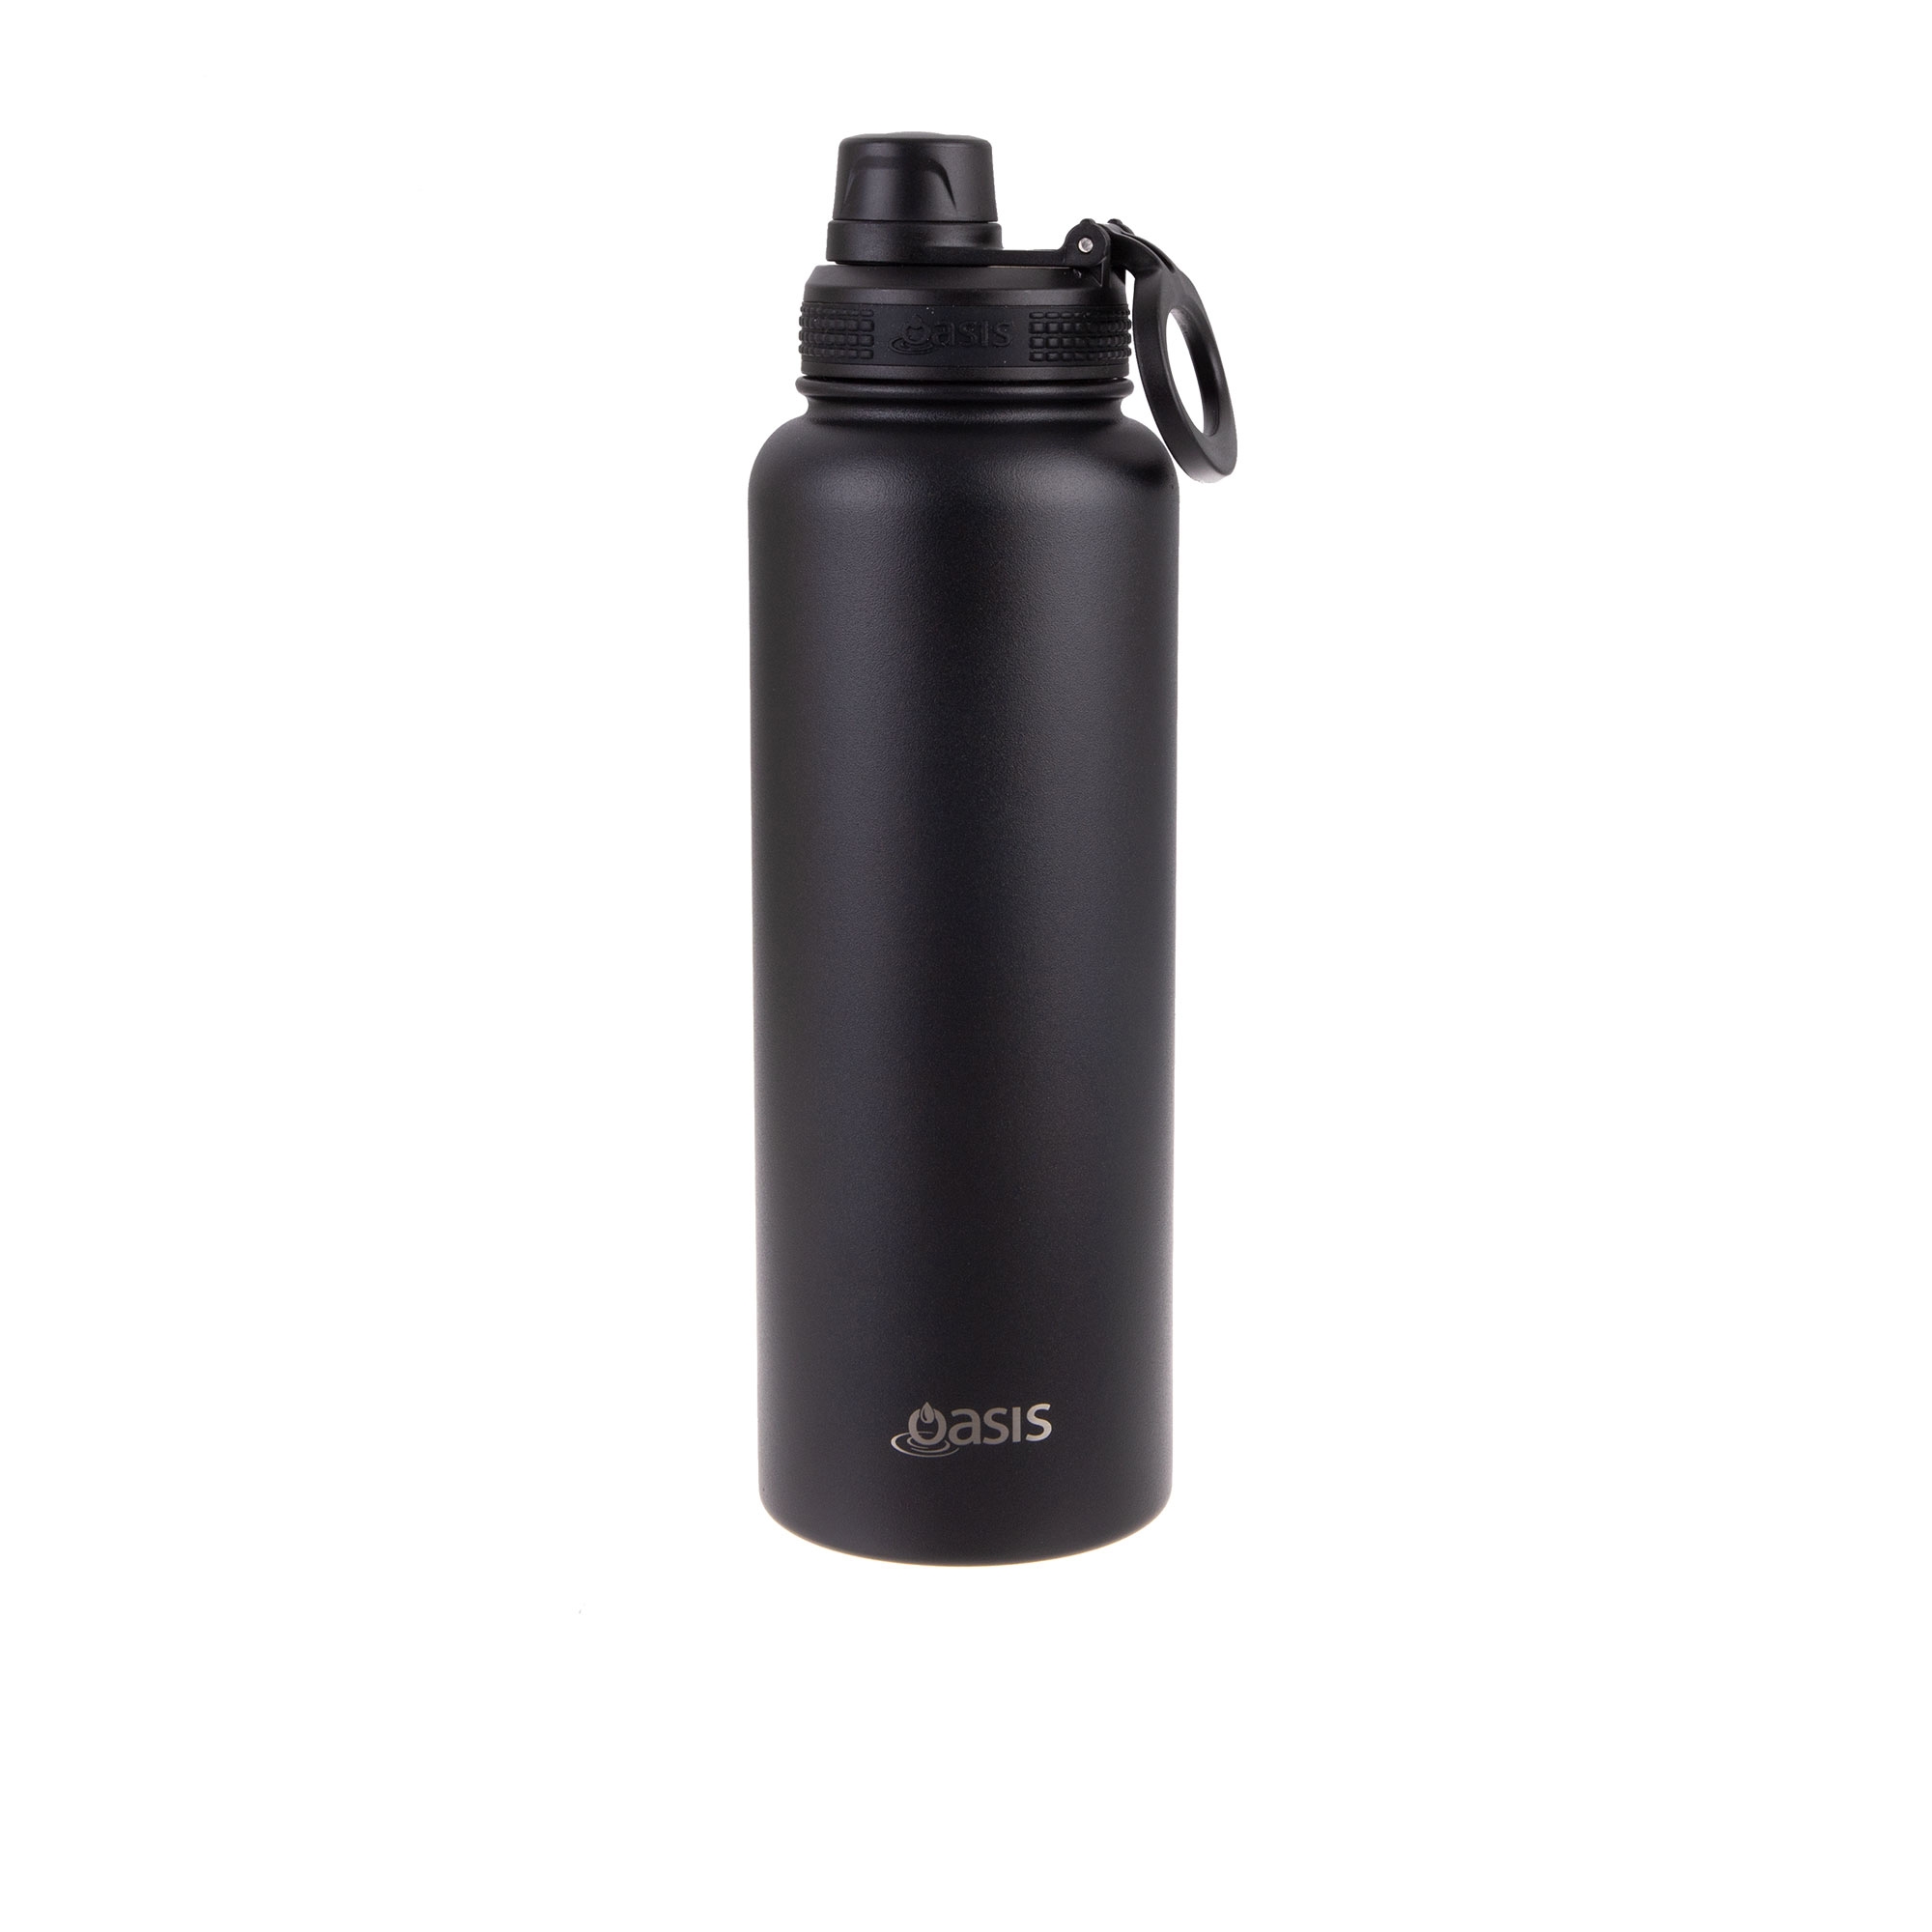 Oasis Challenger Double Wall Insulated Sports Bottle 1.1L Black Image 1